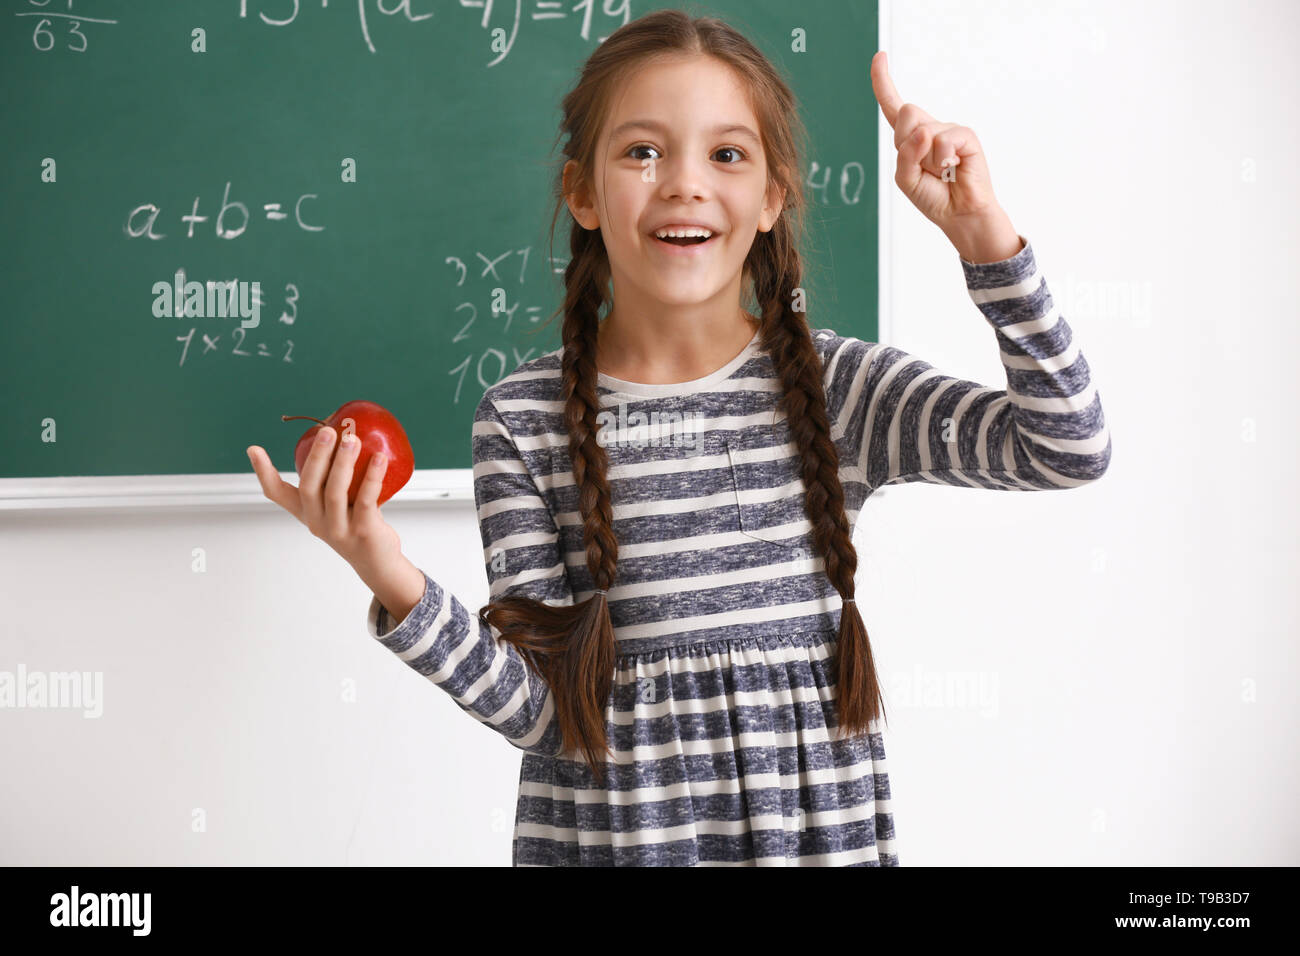 Cute girl with raised index finger in classroom Stock Photo